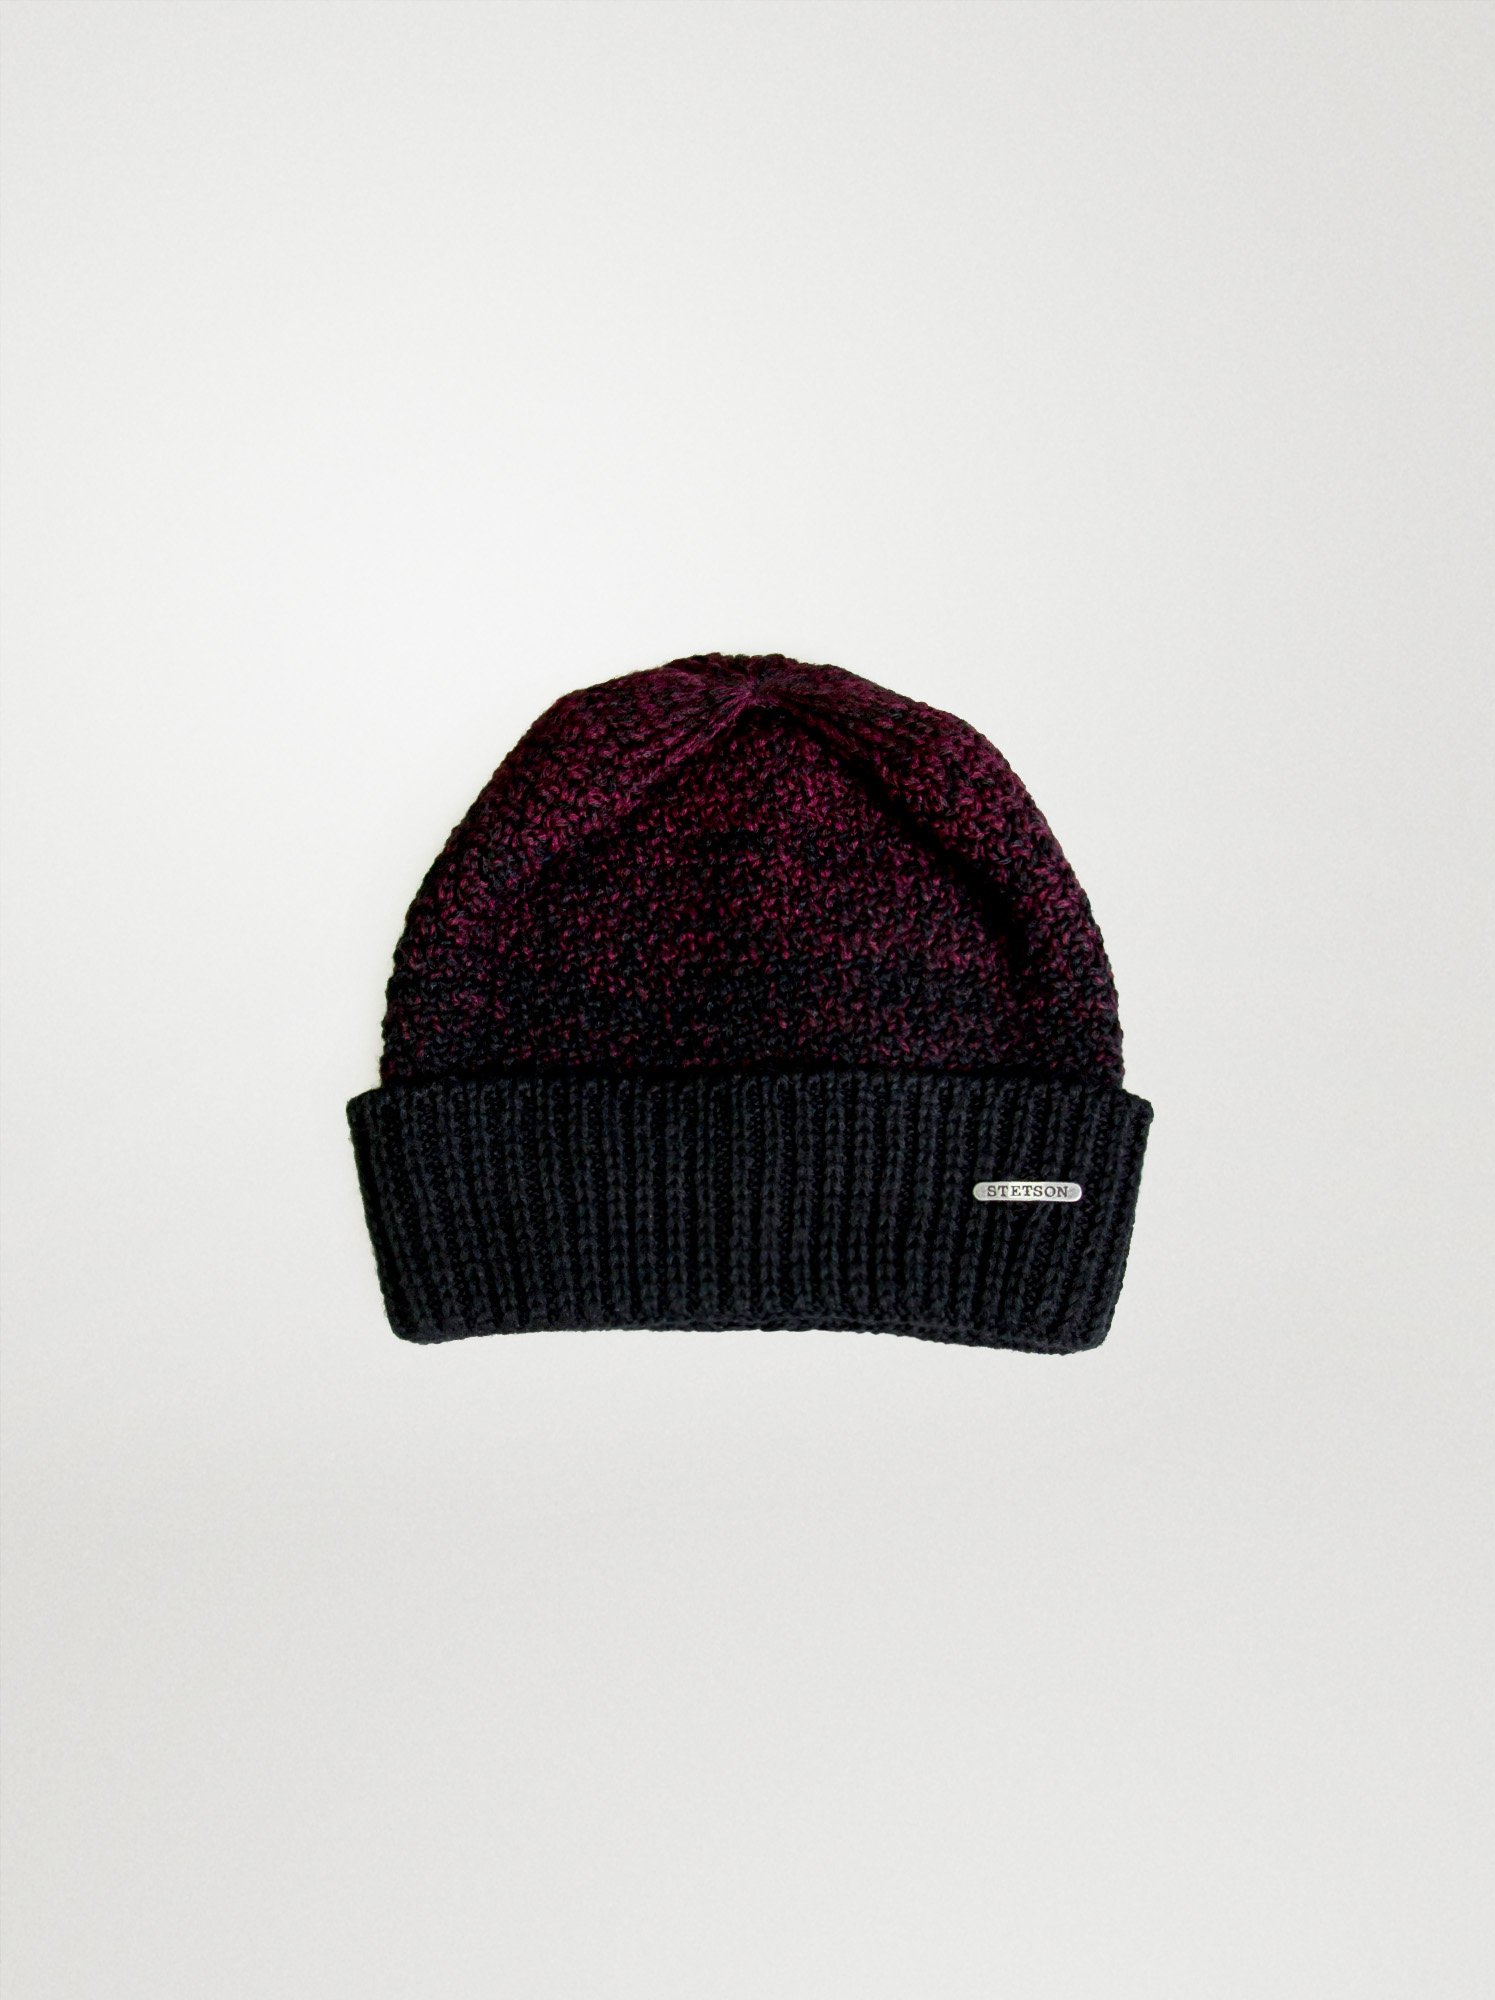 STETSON Beanie hat with wool - Stetson image 1